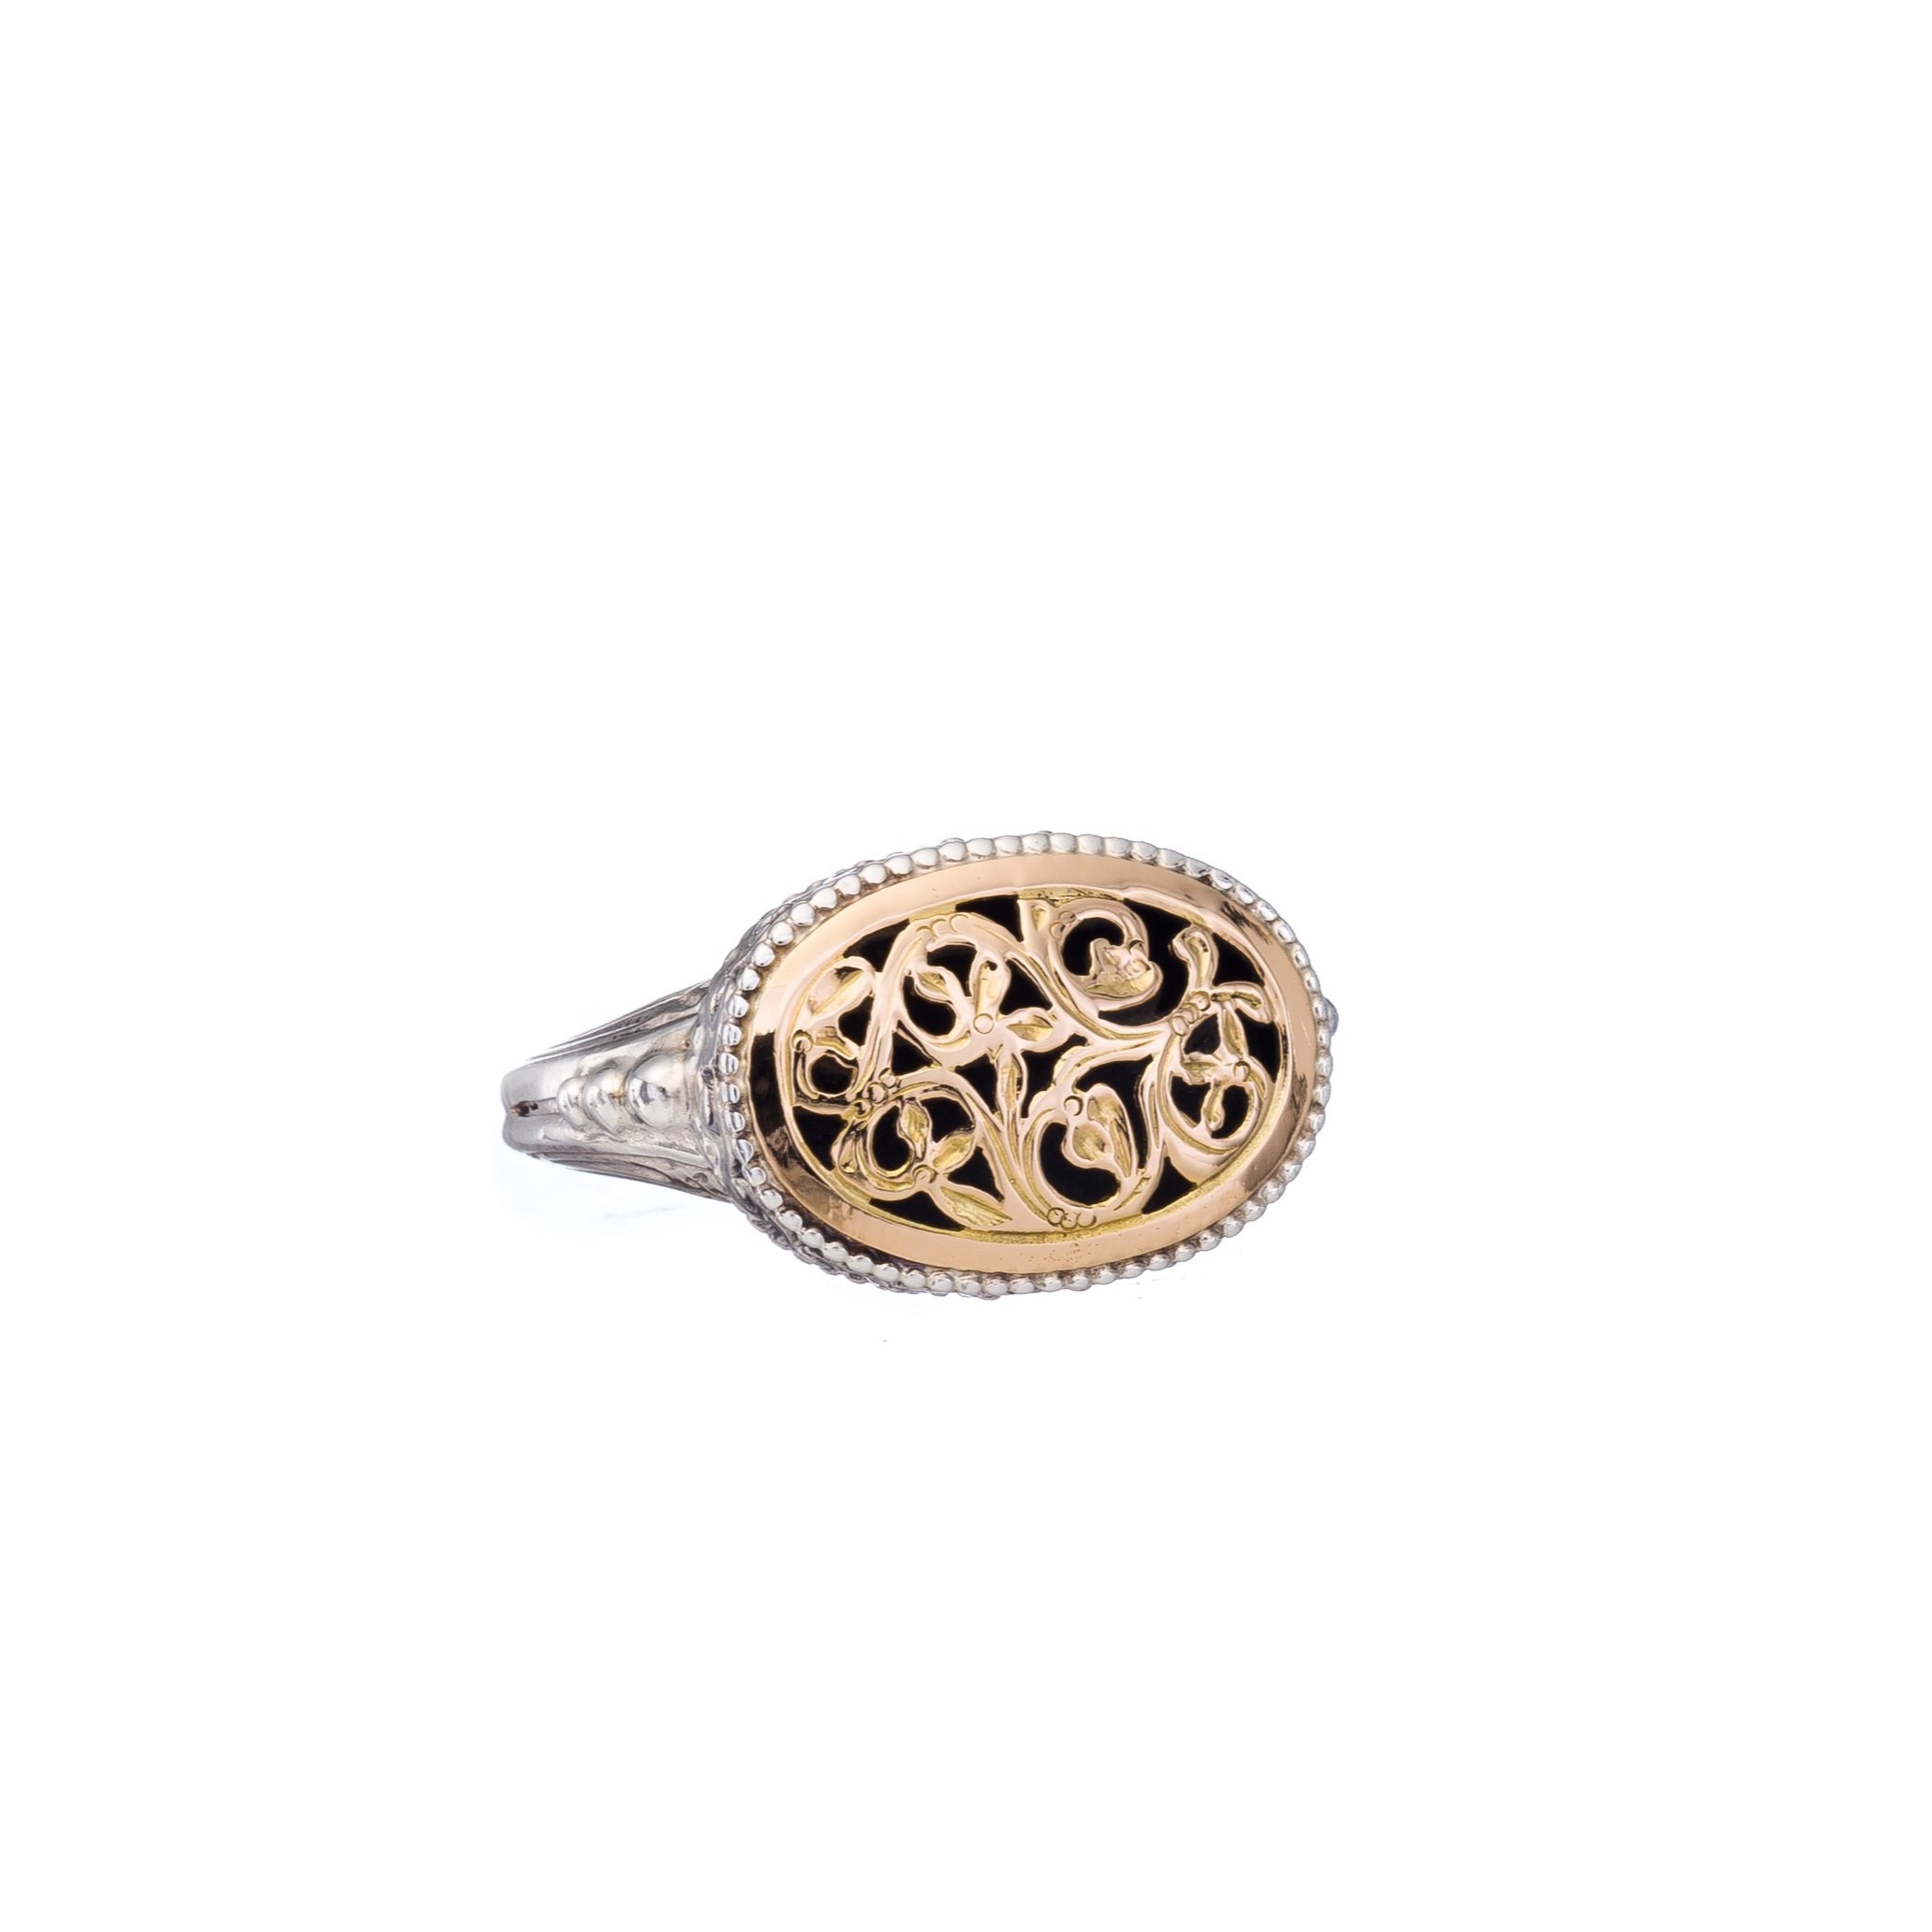 Garden Shadows medium oval ring in 18K Gold and Sterling Silver